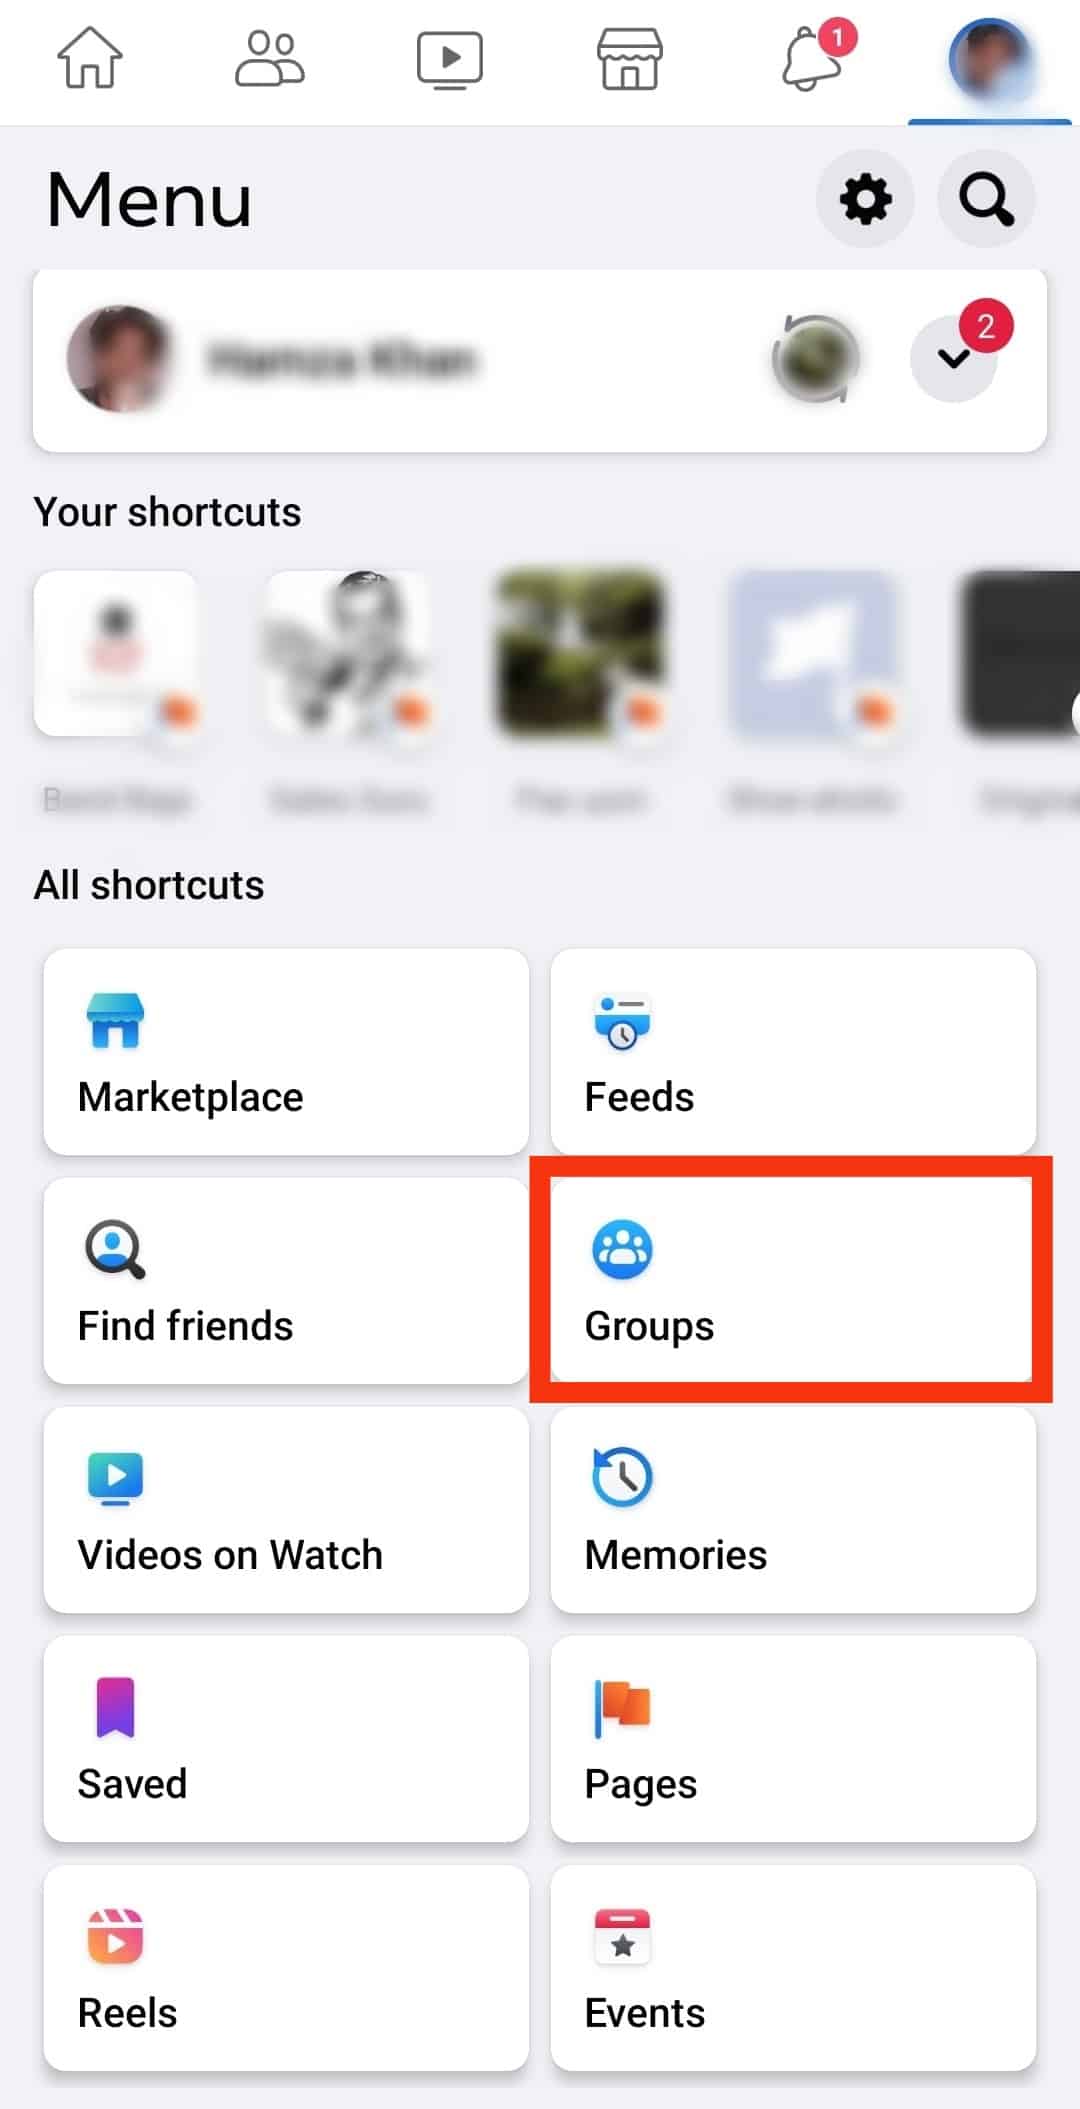 Click The Groups Button